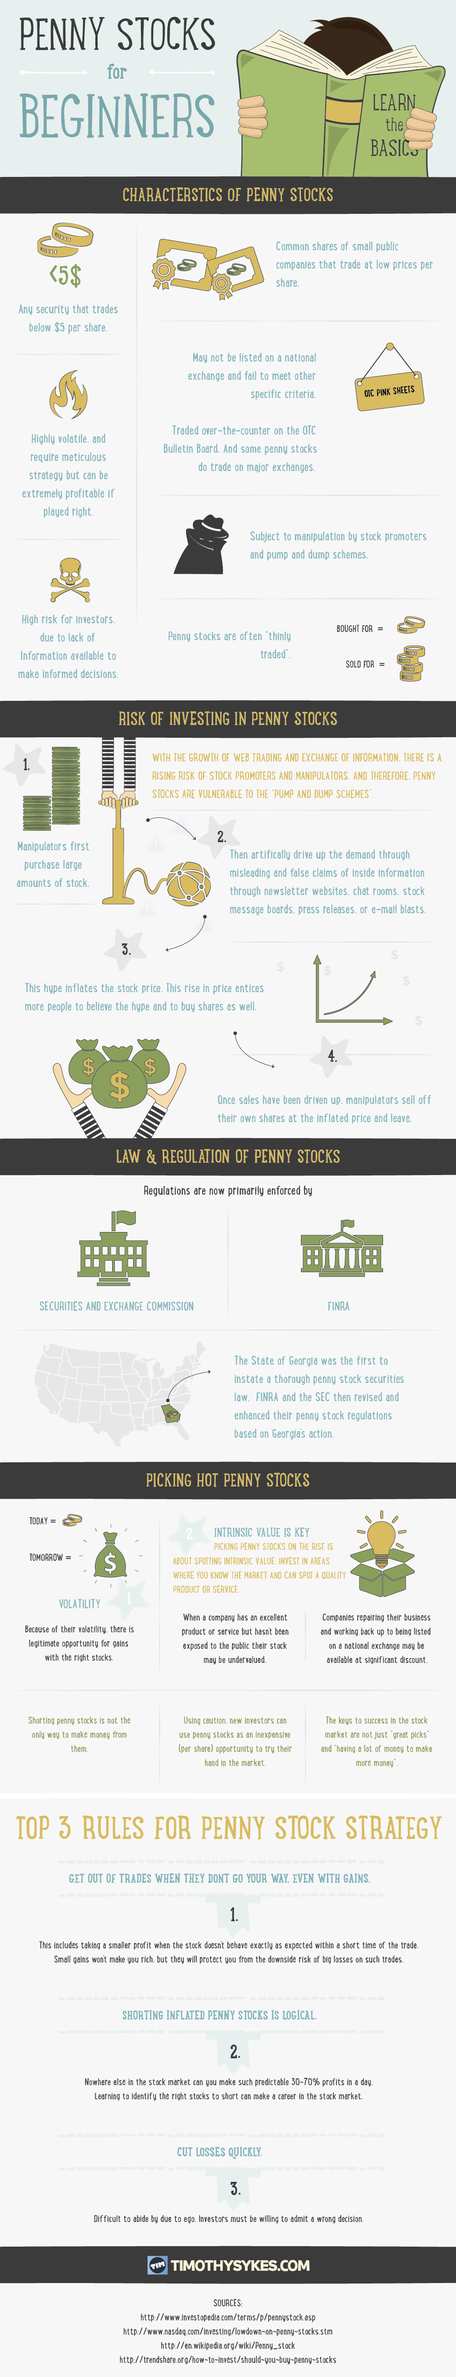 Penny Stocks for Beginners Infographic